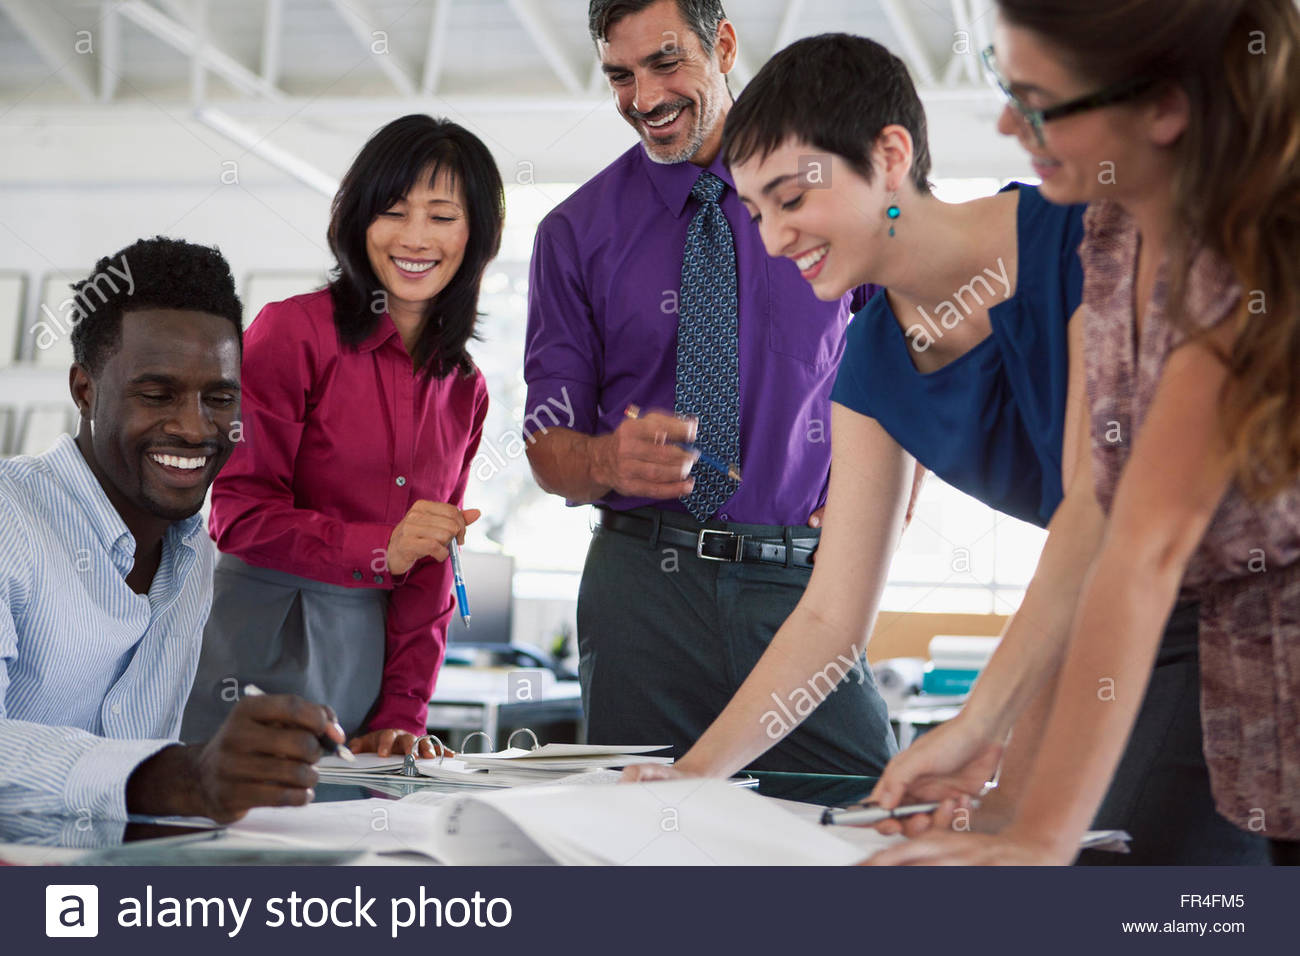 business people having a laugh while reviewing paperwork Stock Photo